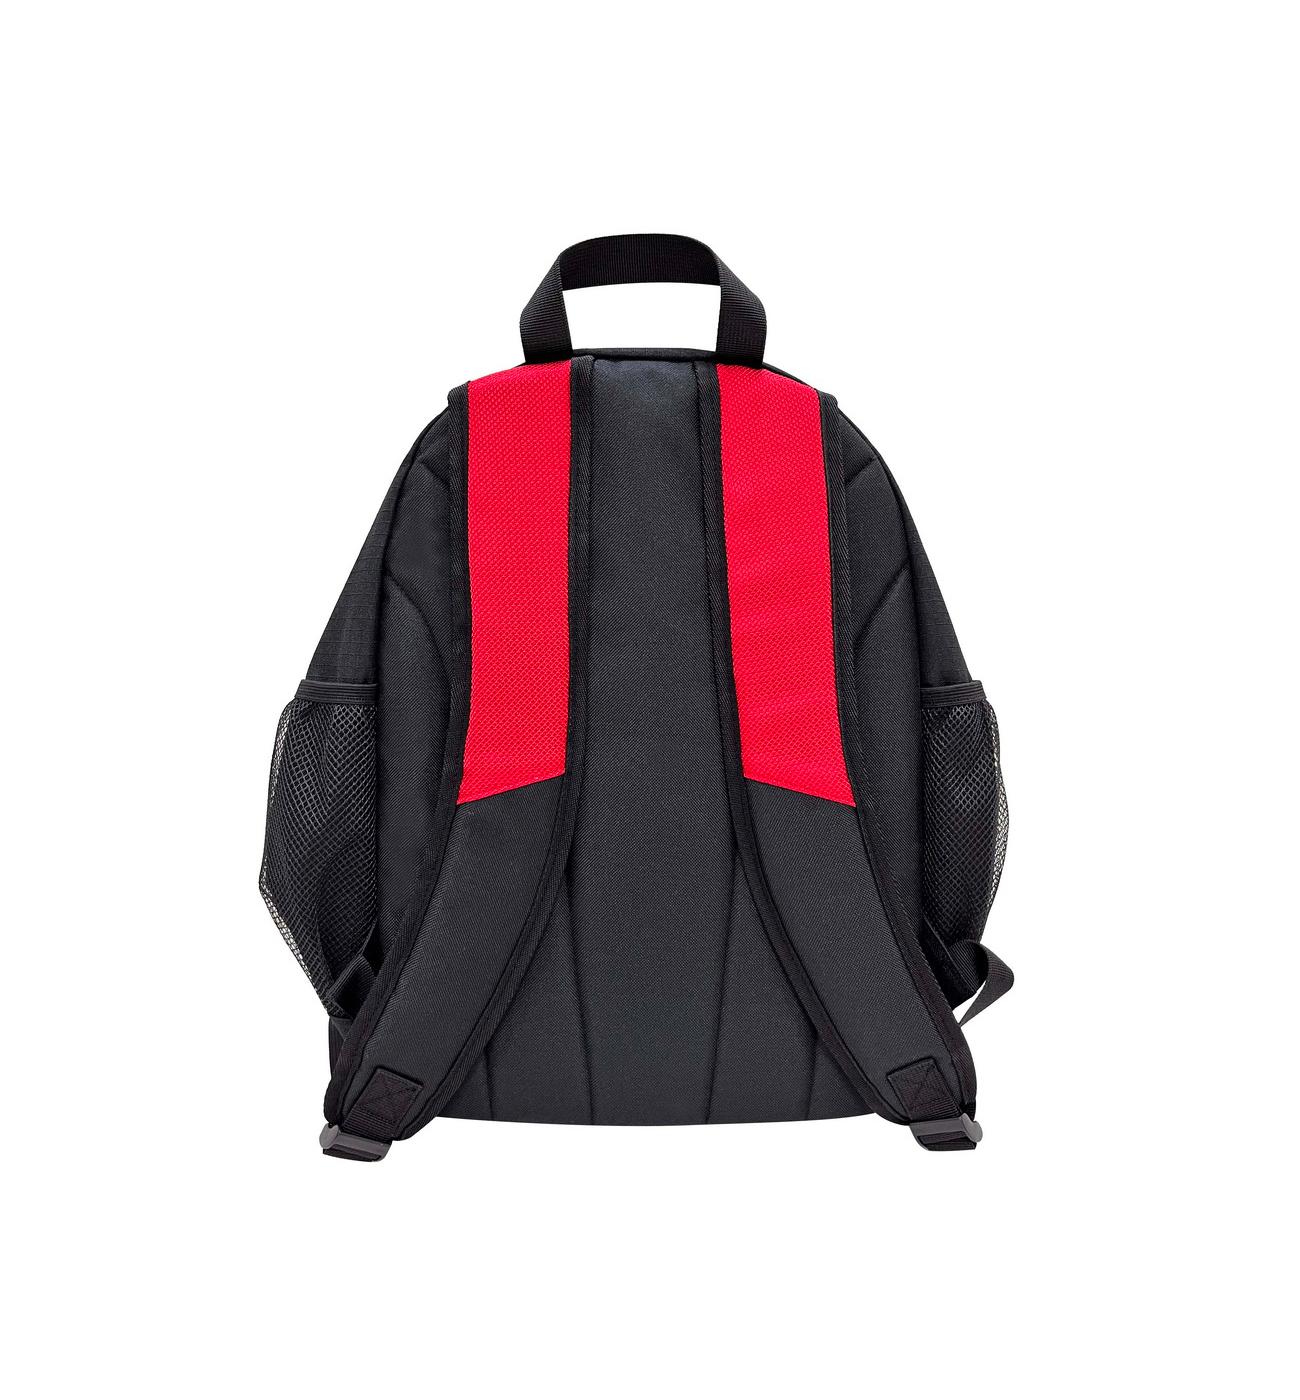 Tech Gear Downtown Backpack - Black & Red; image 3 of 3